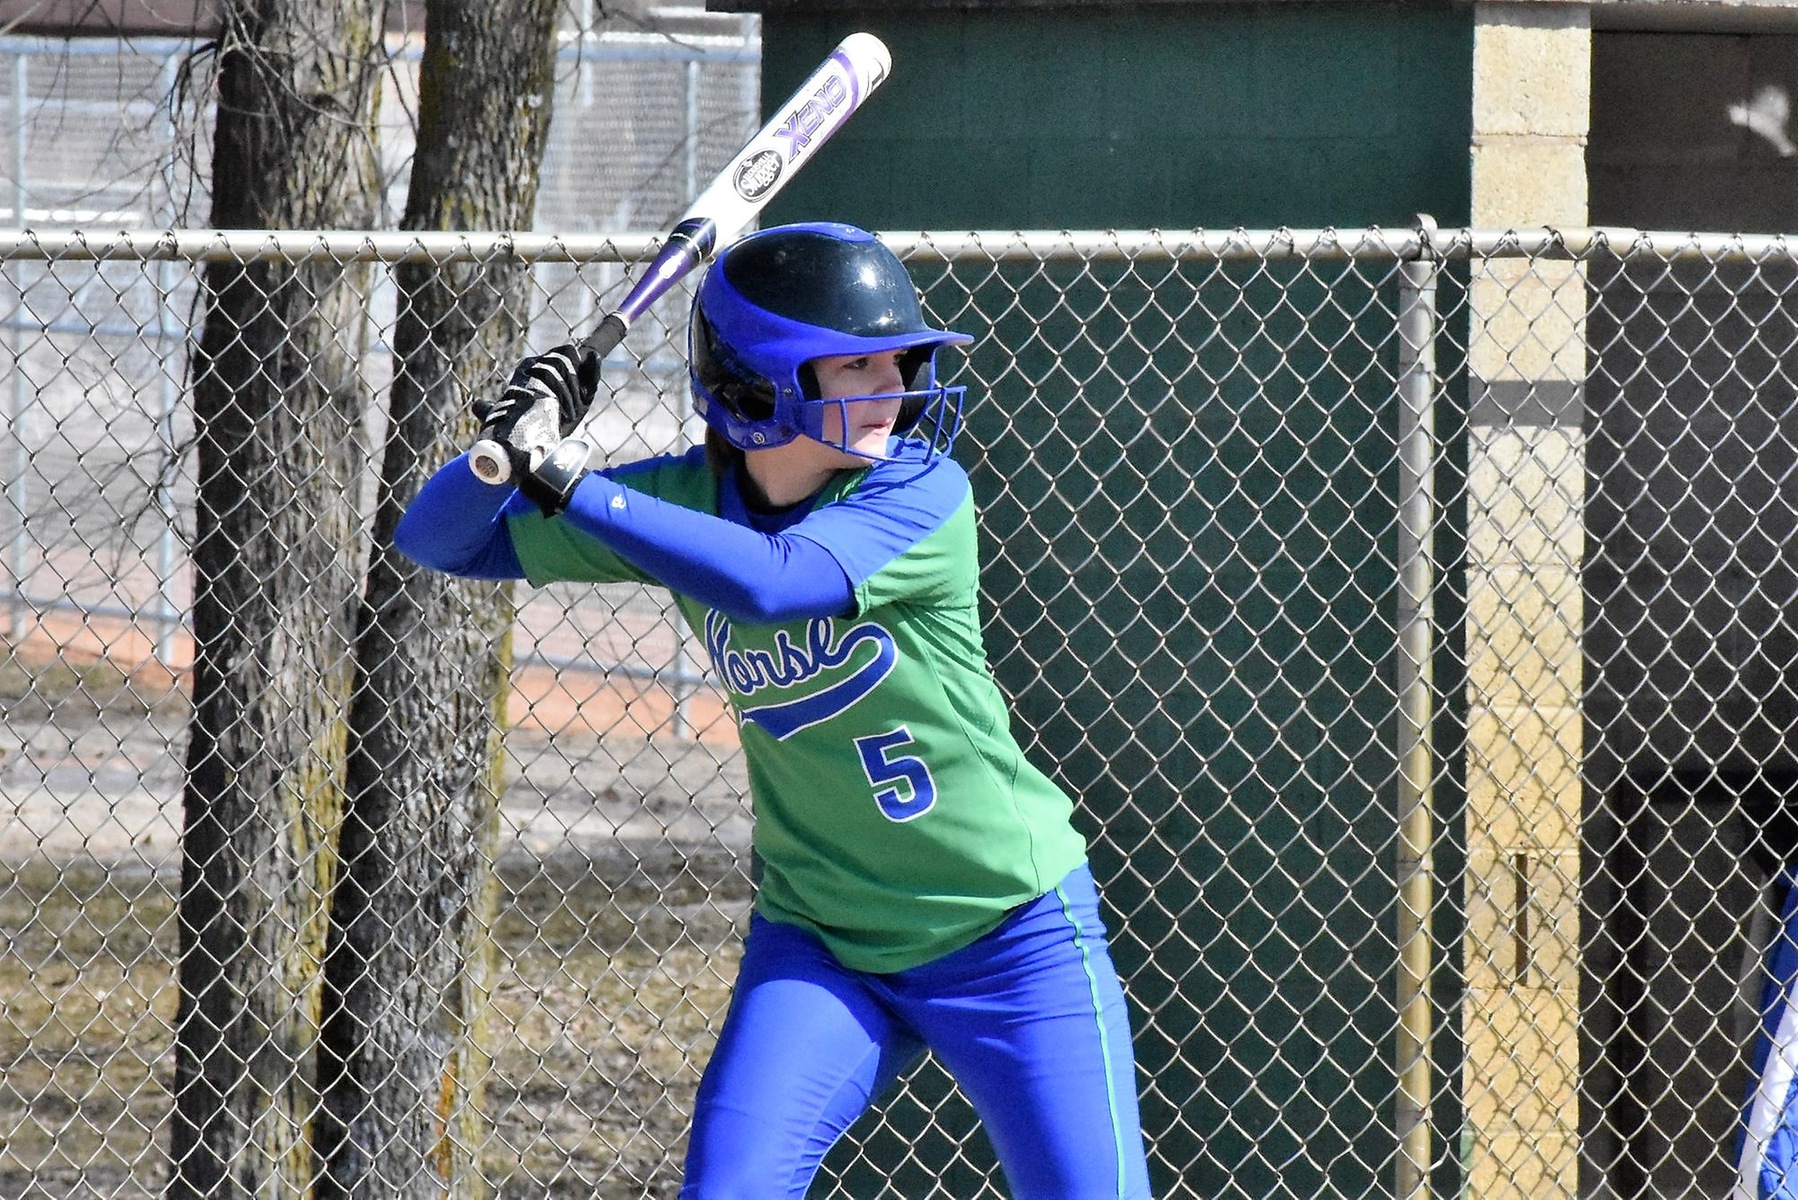 Eve LeFleche in her batting stance waiting for the pitch